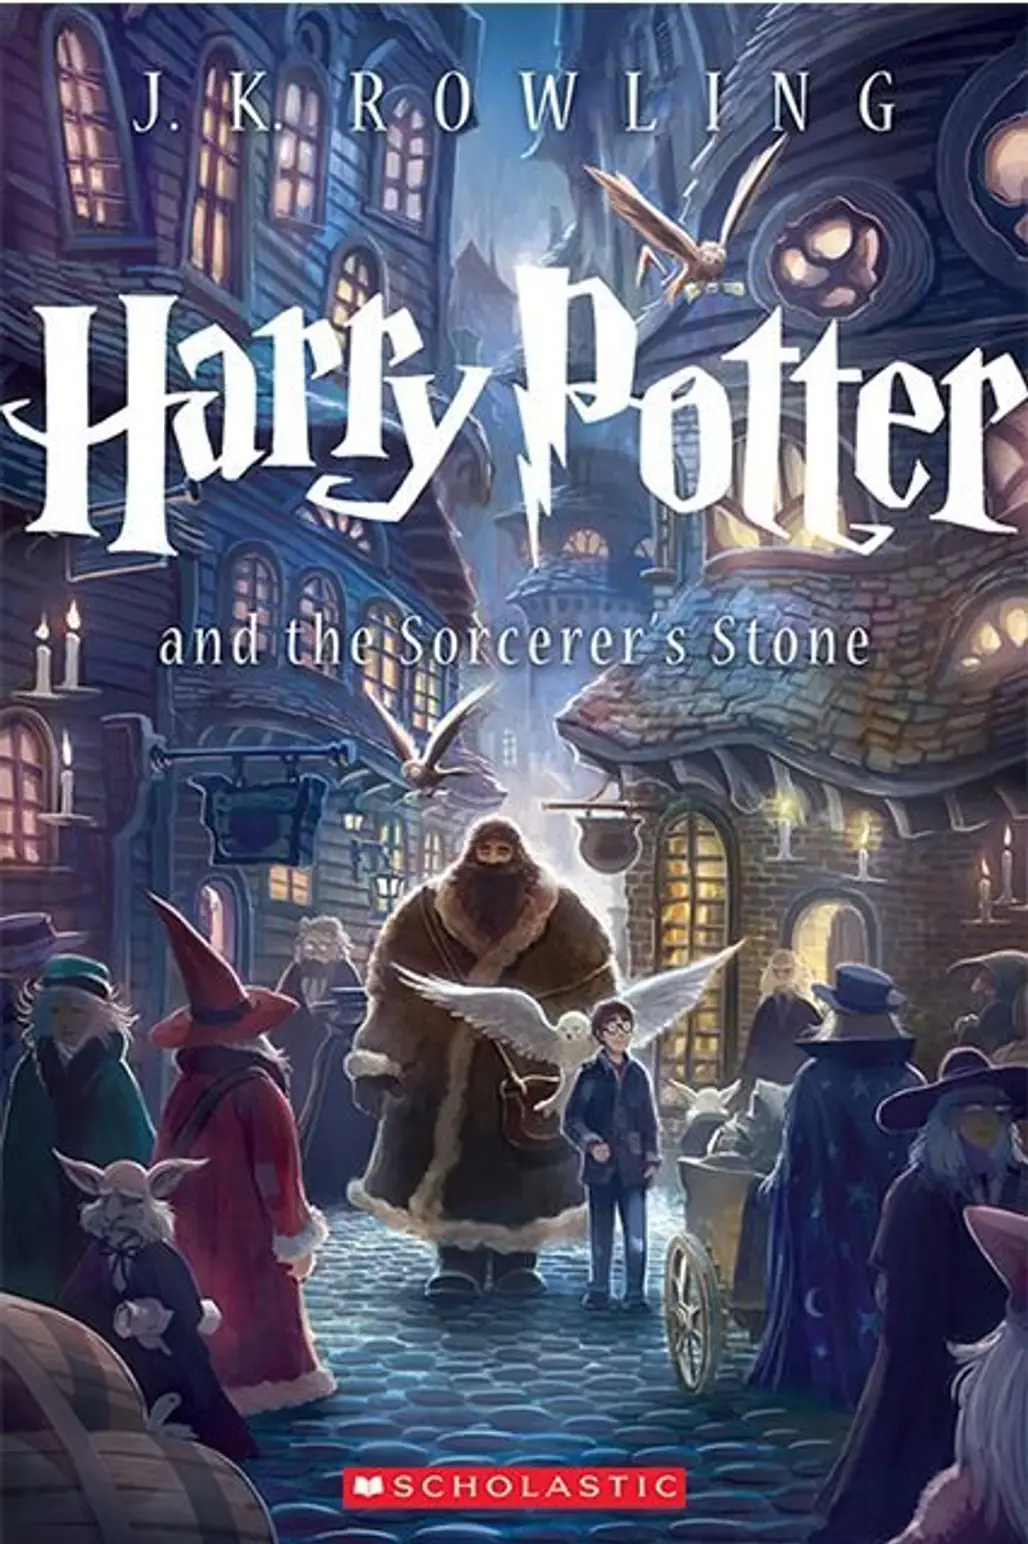 Harry Potter and the Sorcerer's Stone by J.k Rowling